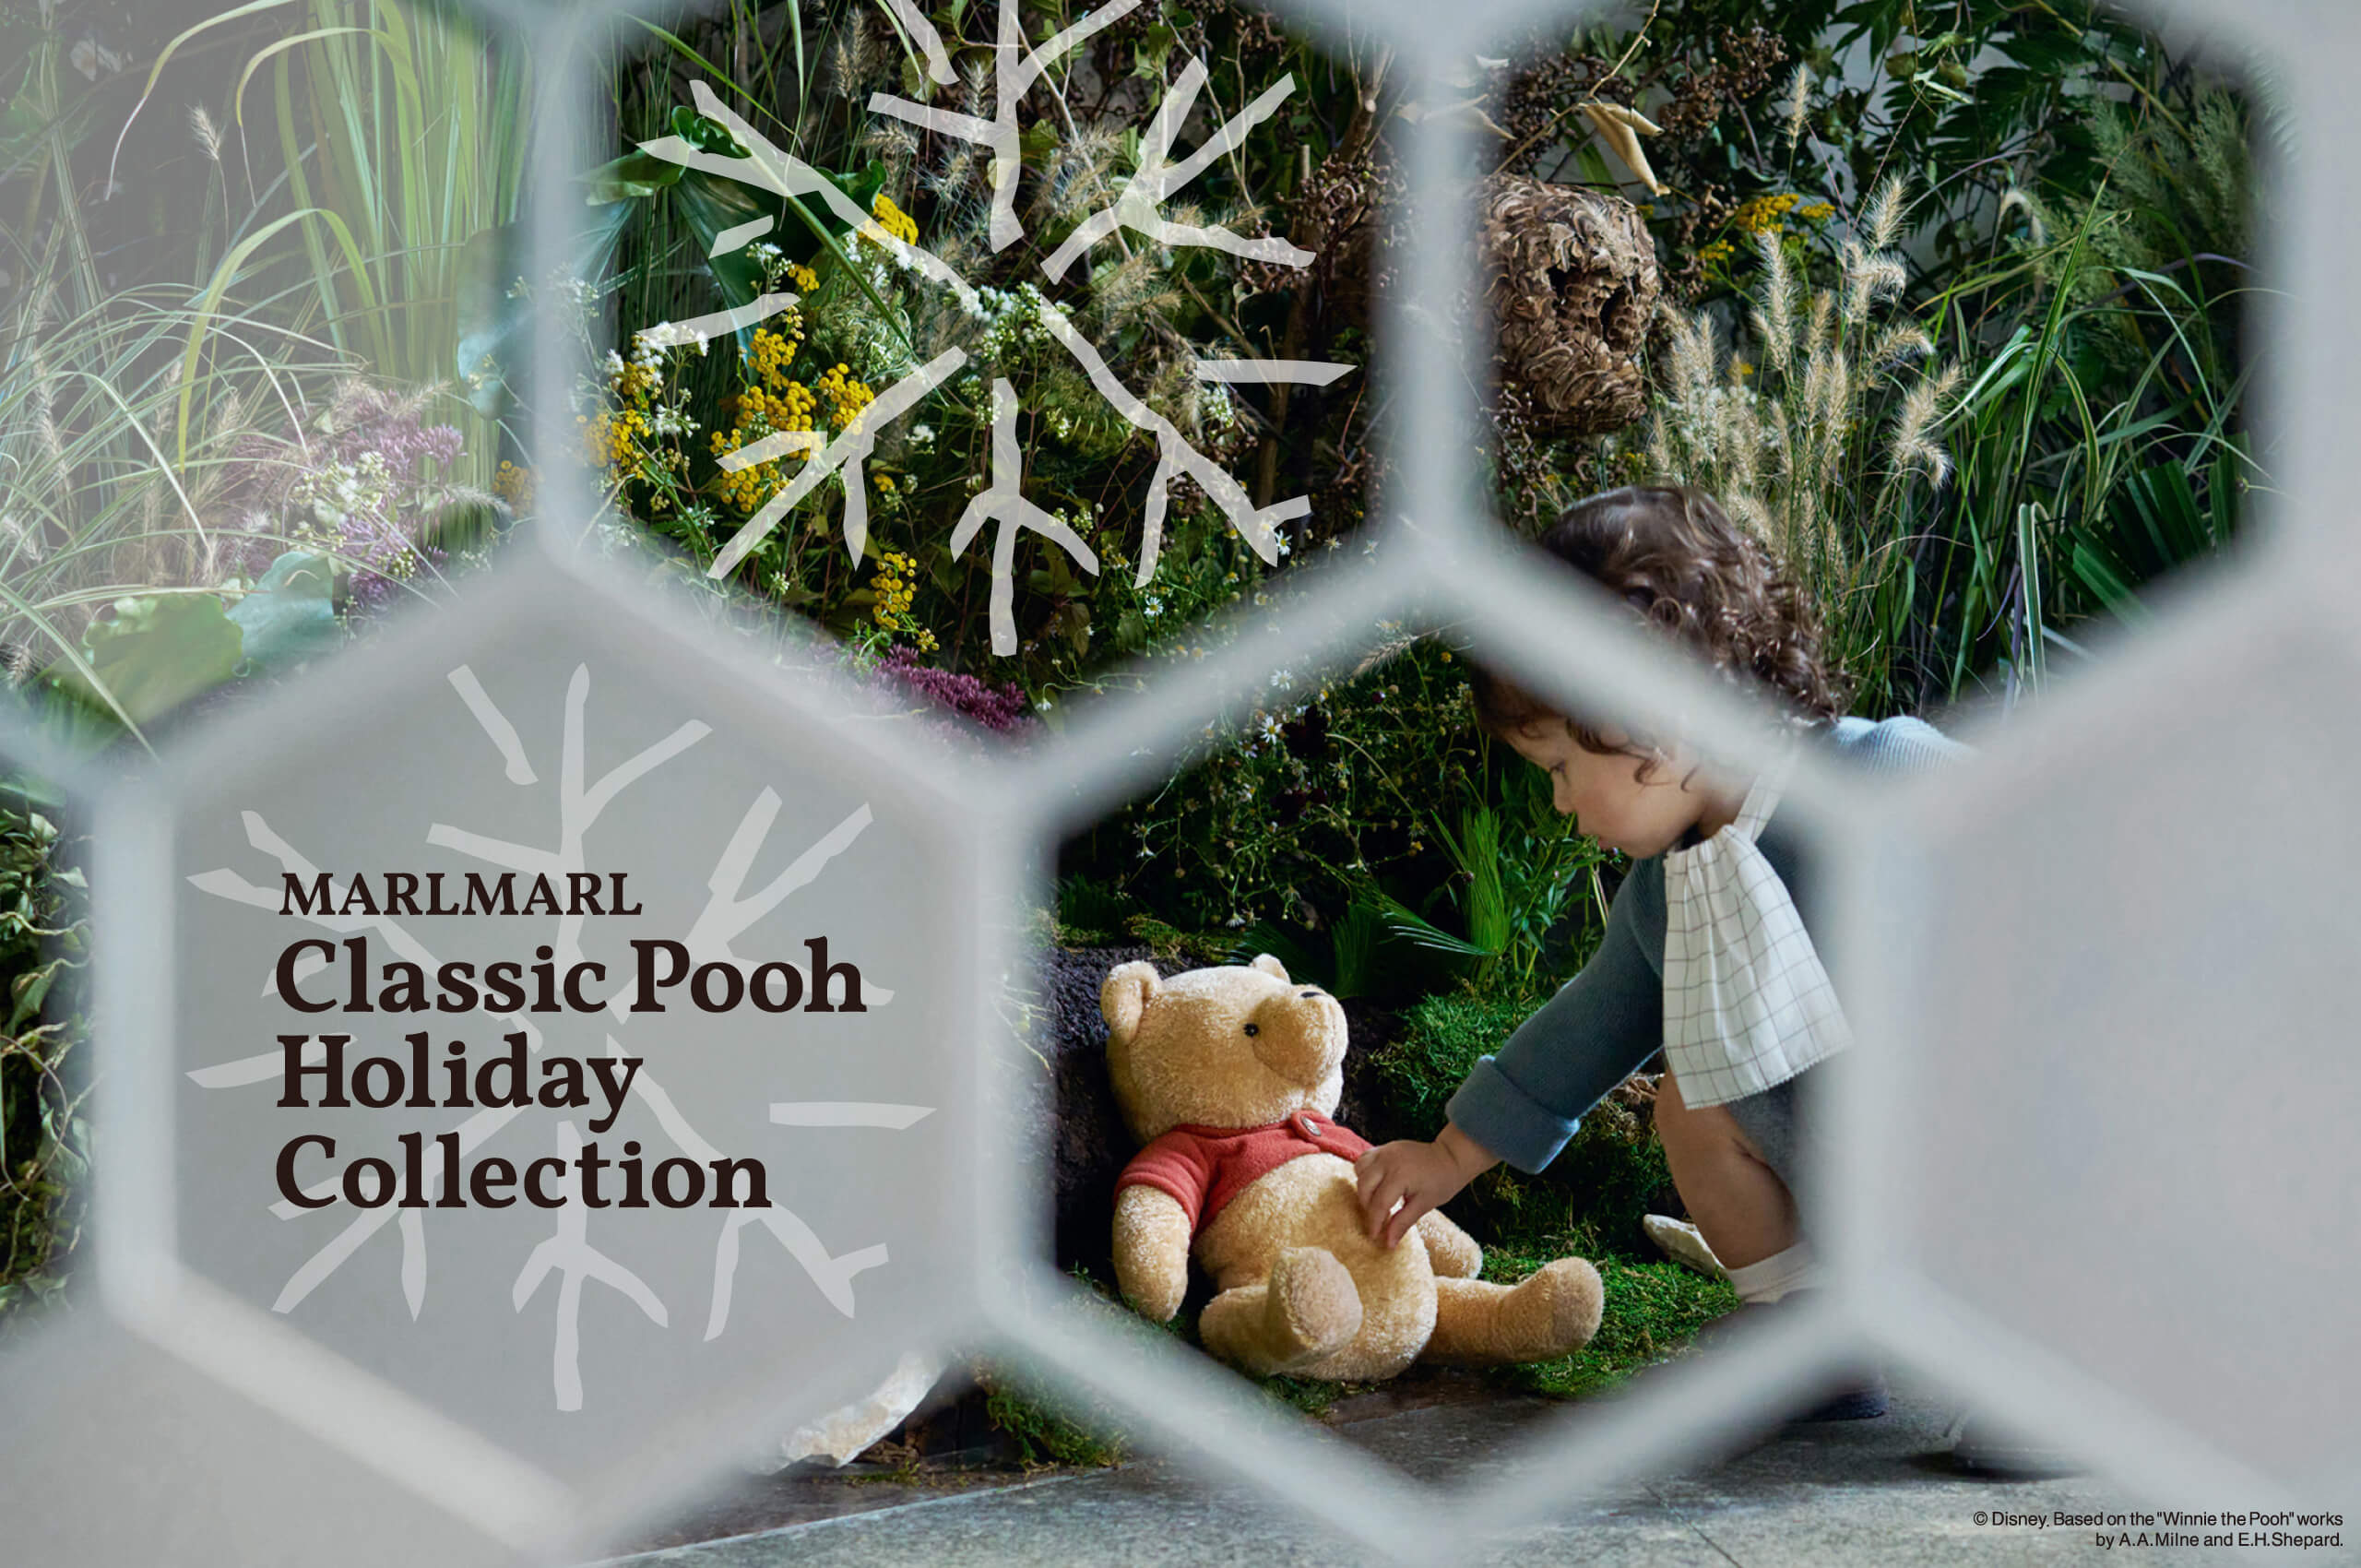 MARLMARL Classic Pooh Holiday Collection